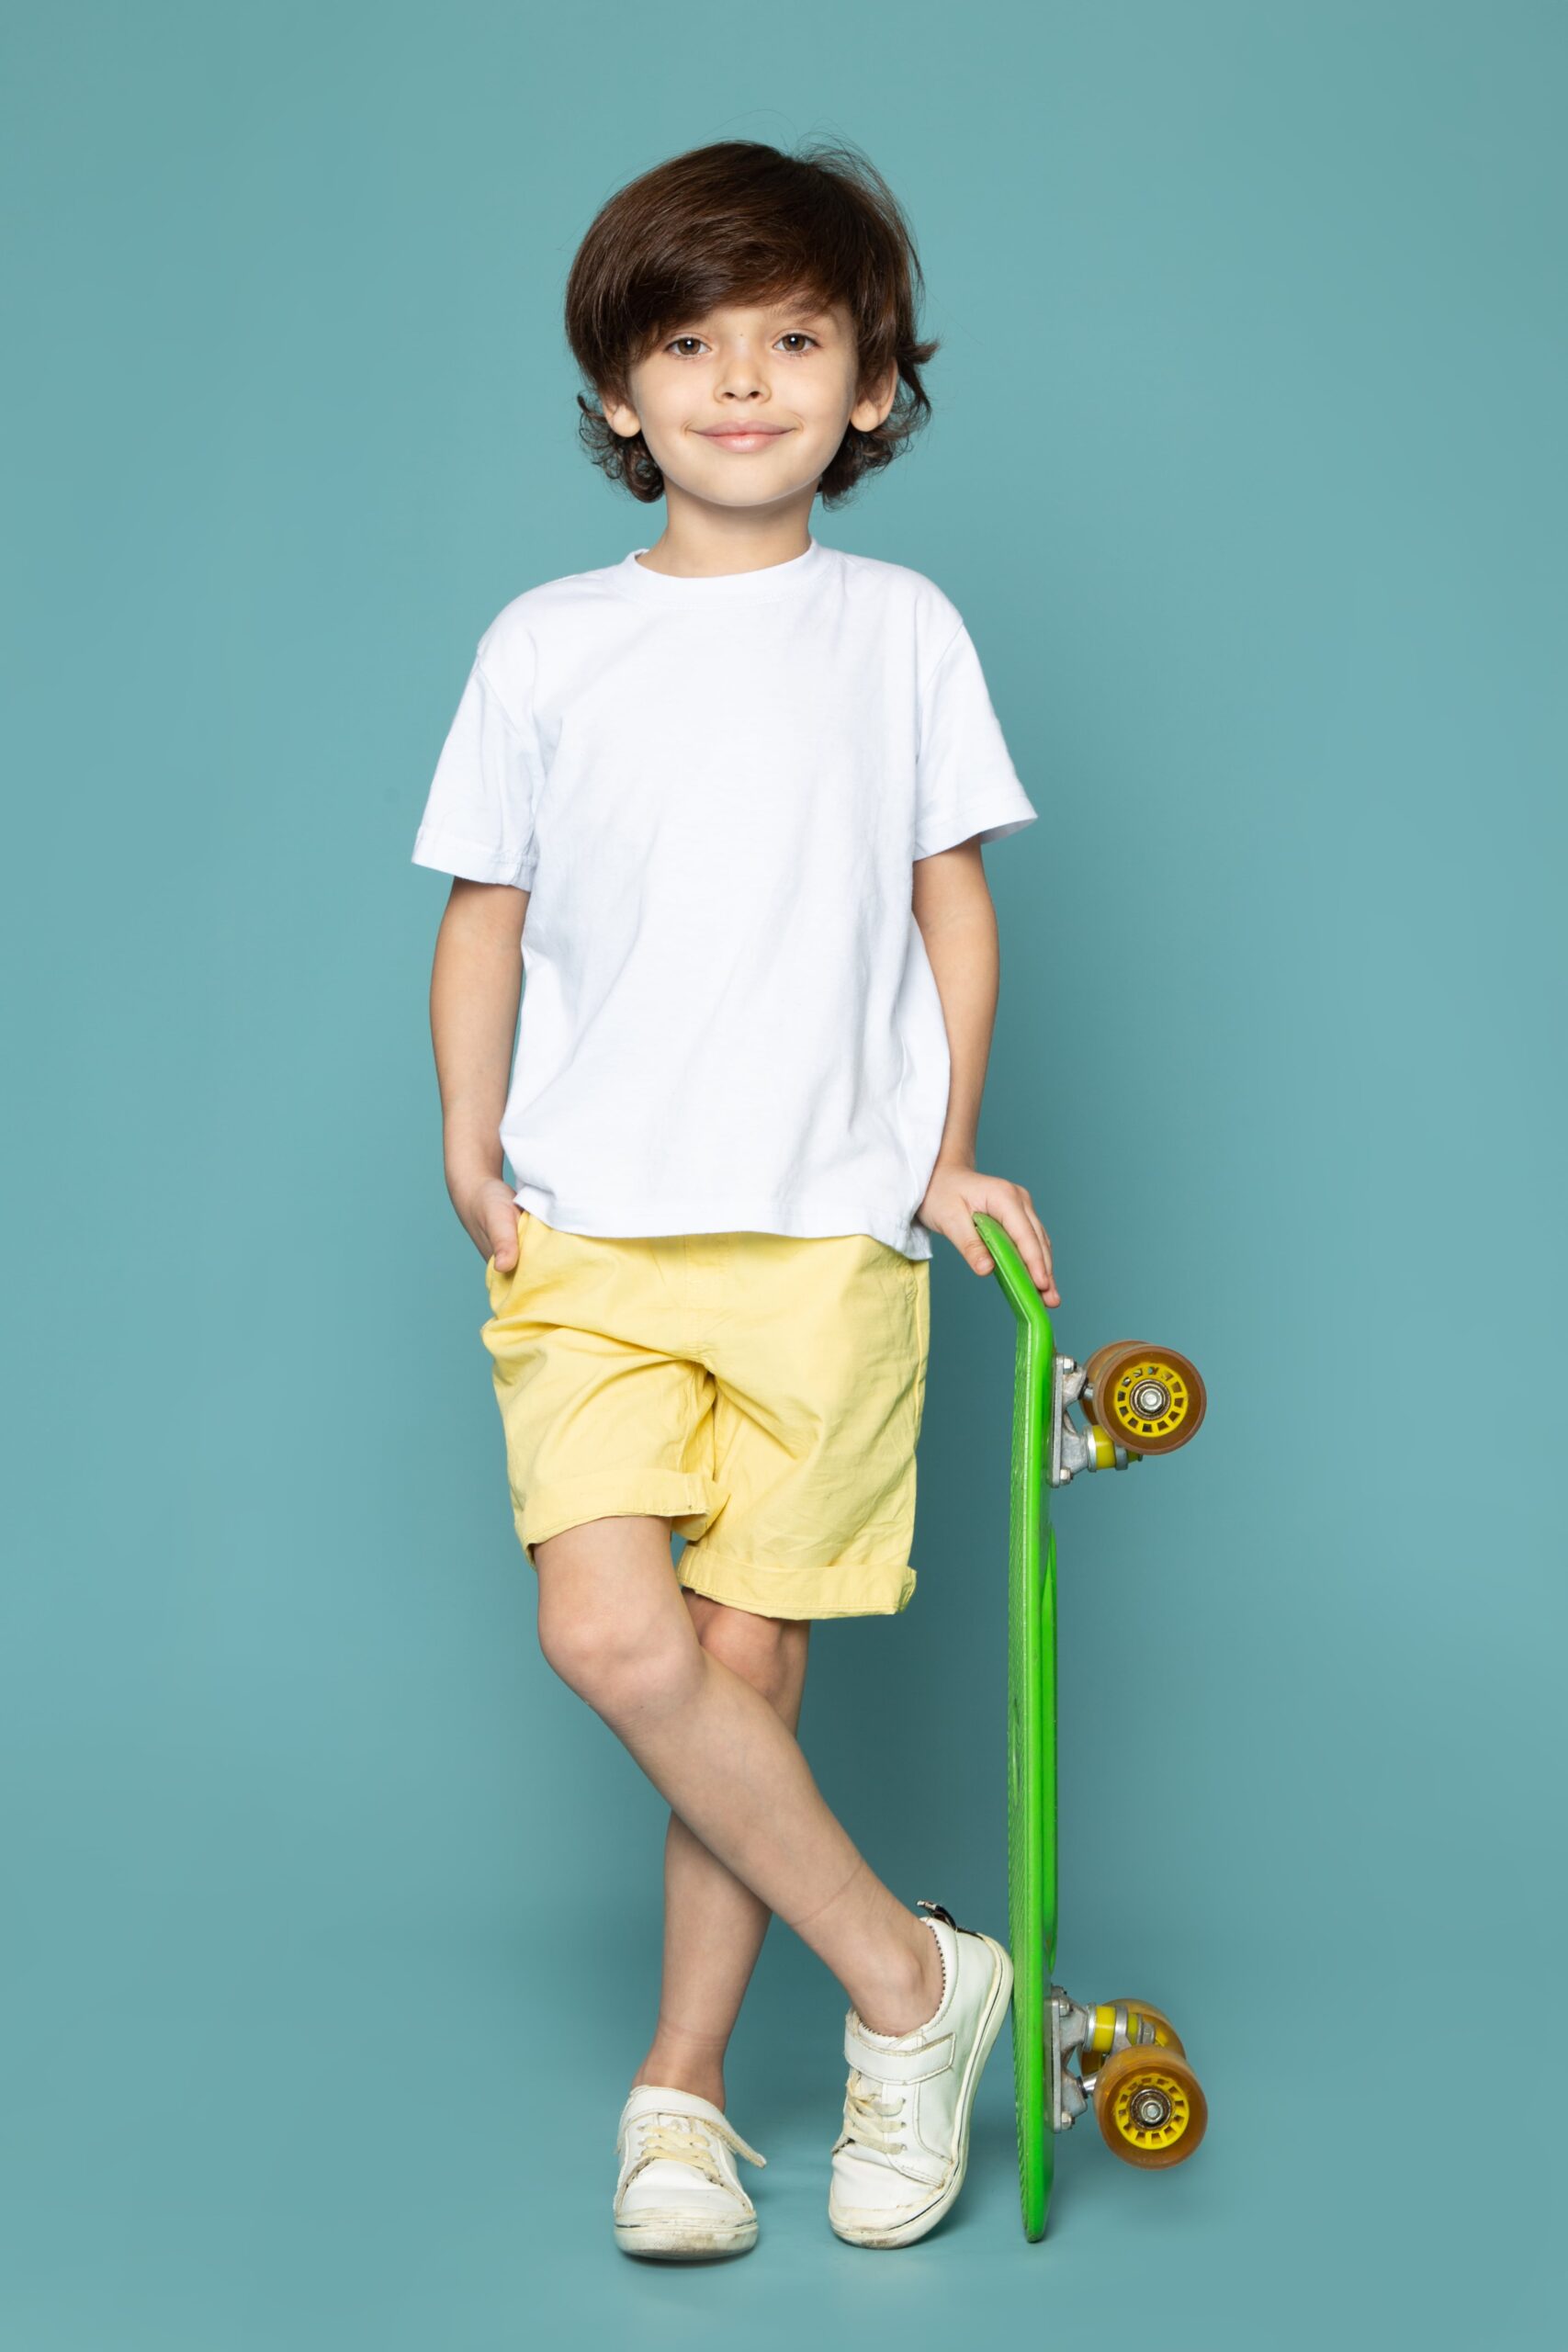 front-view-cute-child-boy-white-t-shirt-yellow-jeans-holding-green-skateboard-blue-floor-min